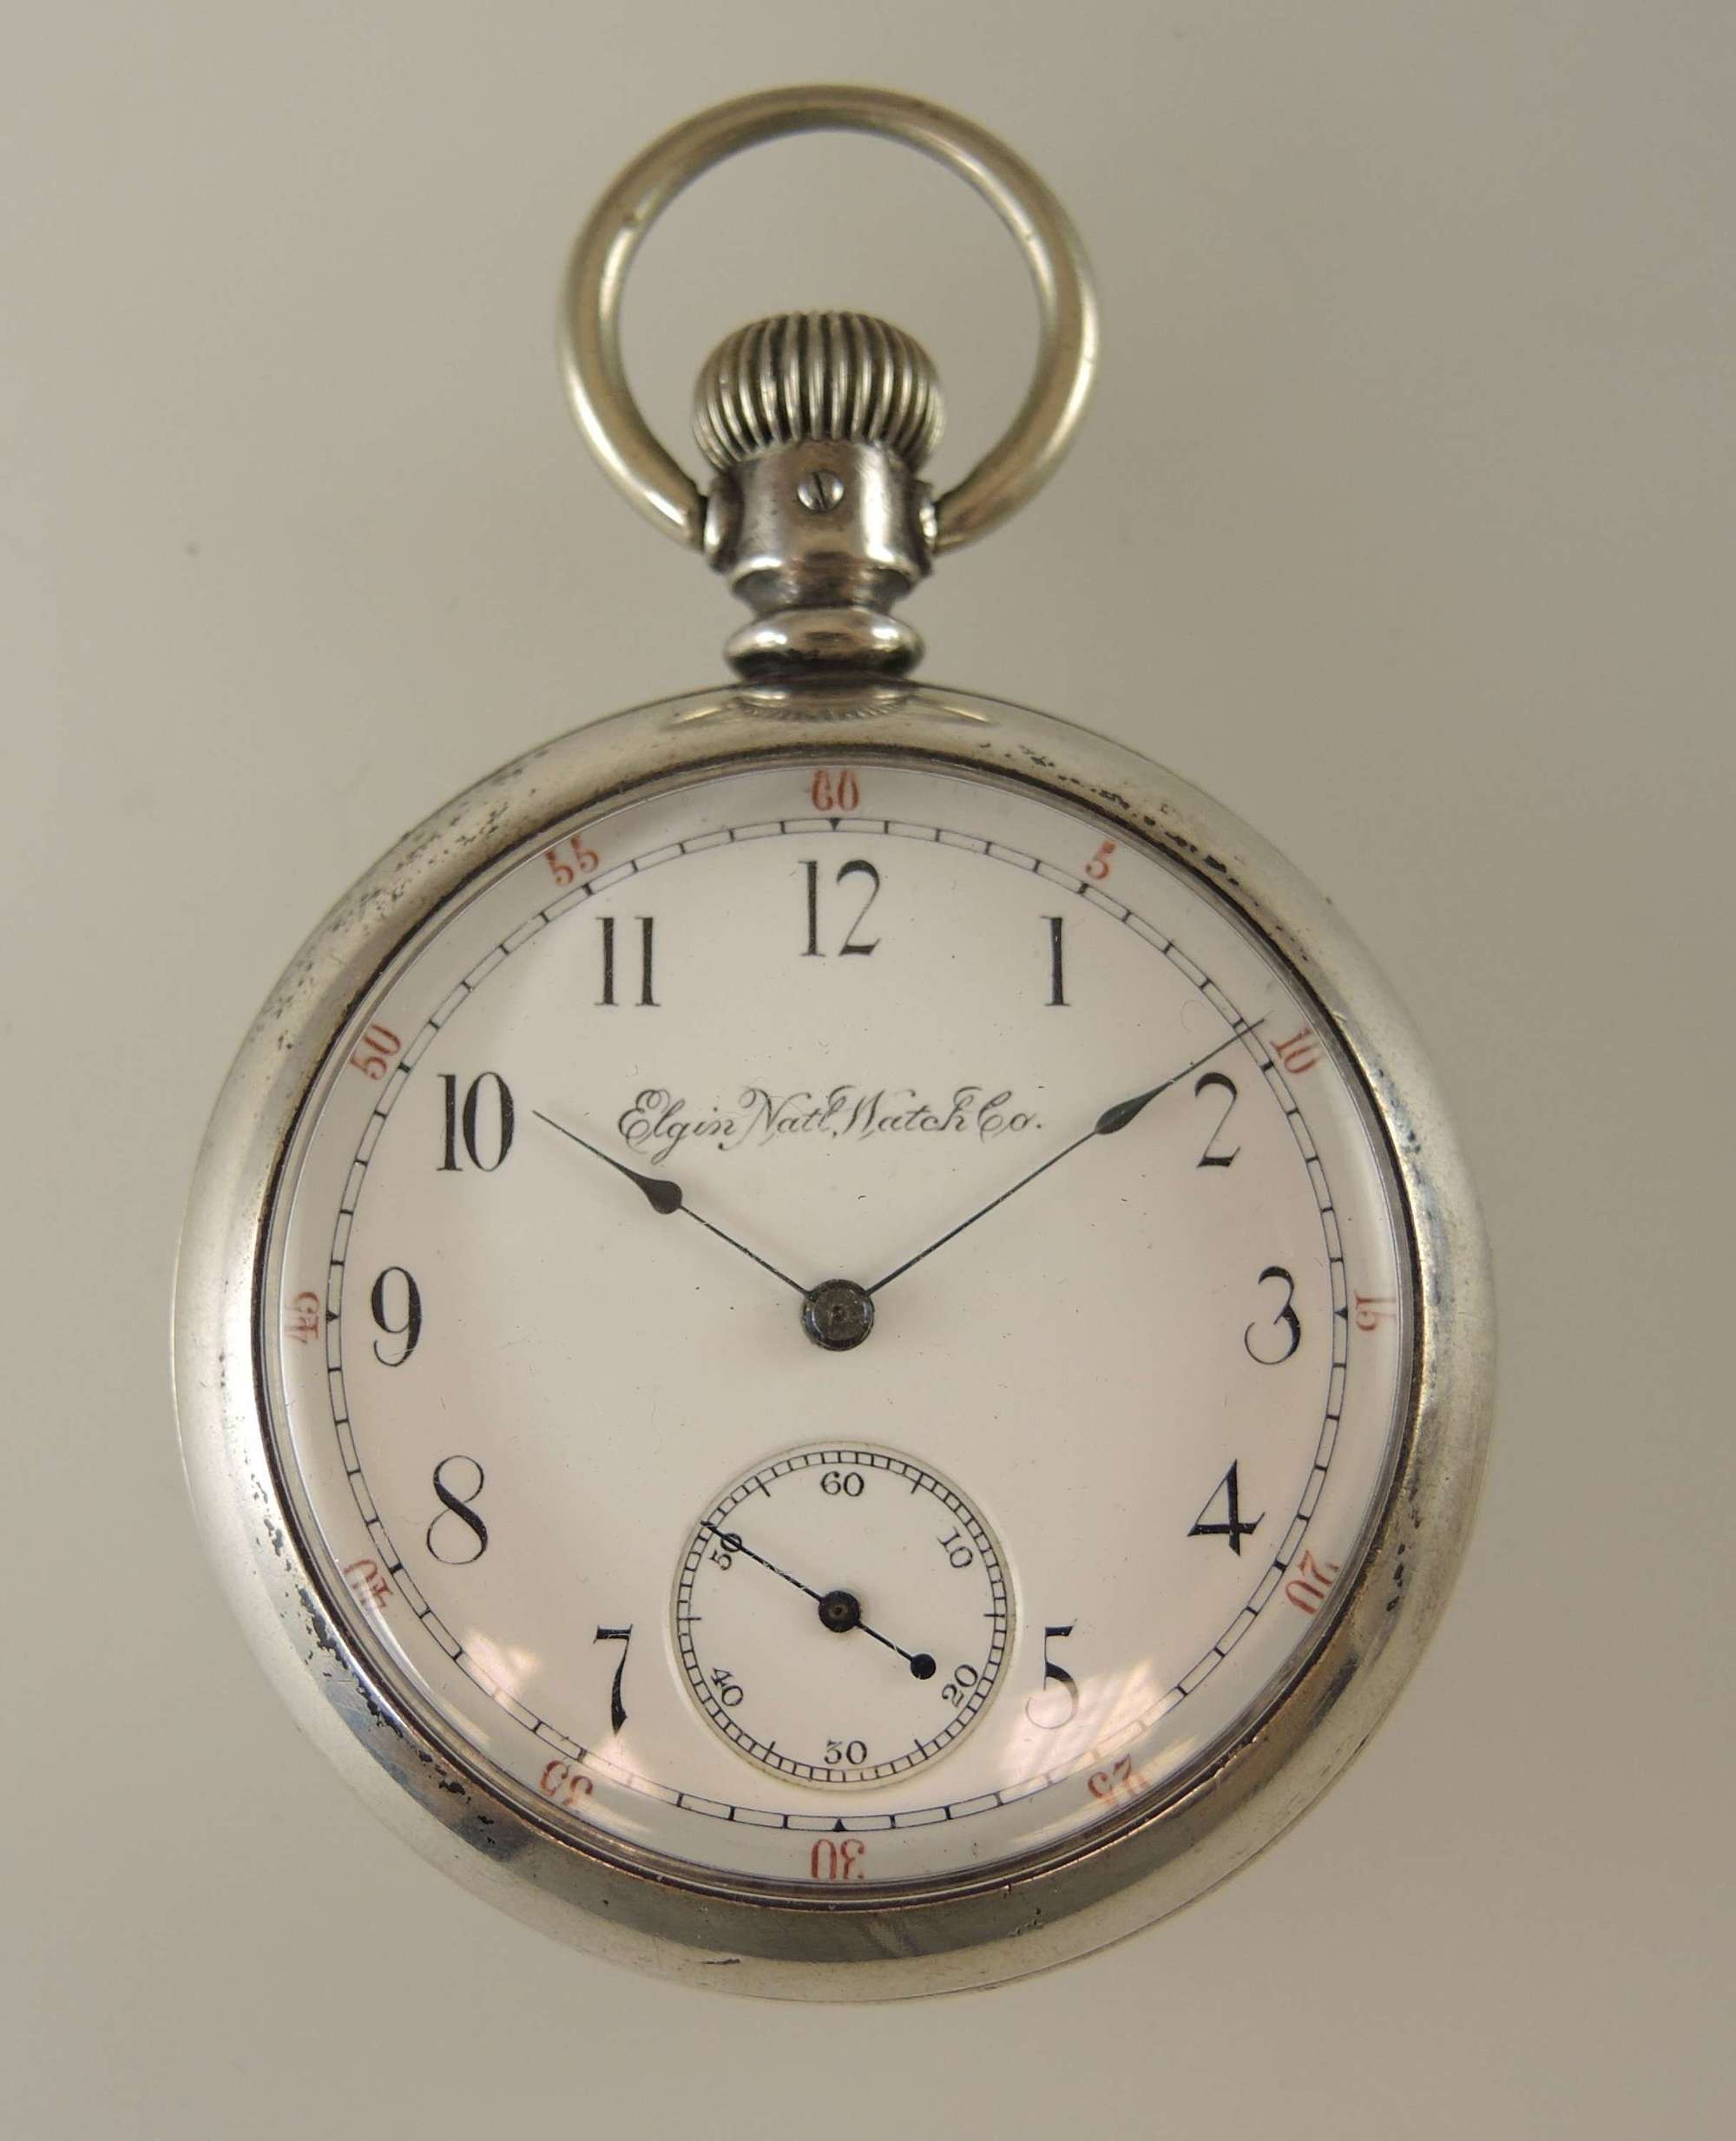 Rare Elgin pocket watch with a convertible movement. c1891